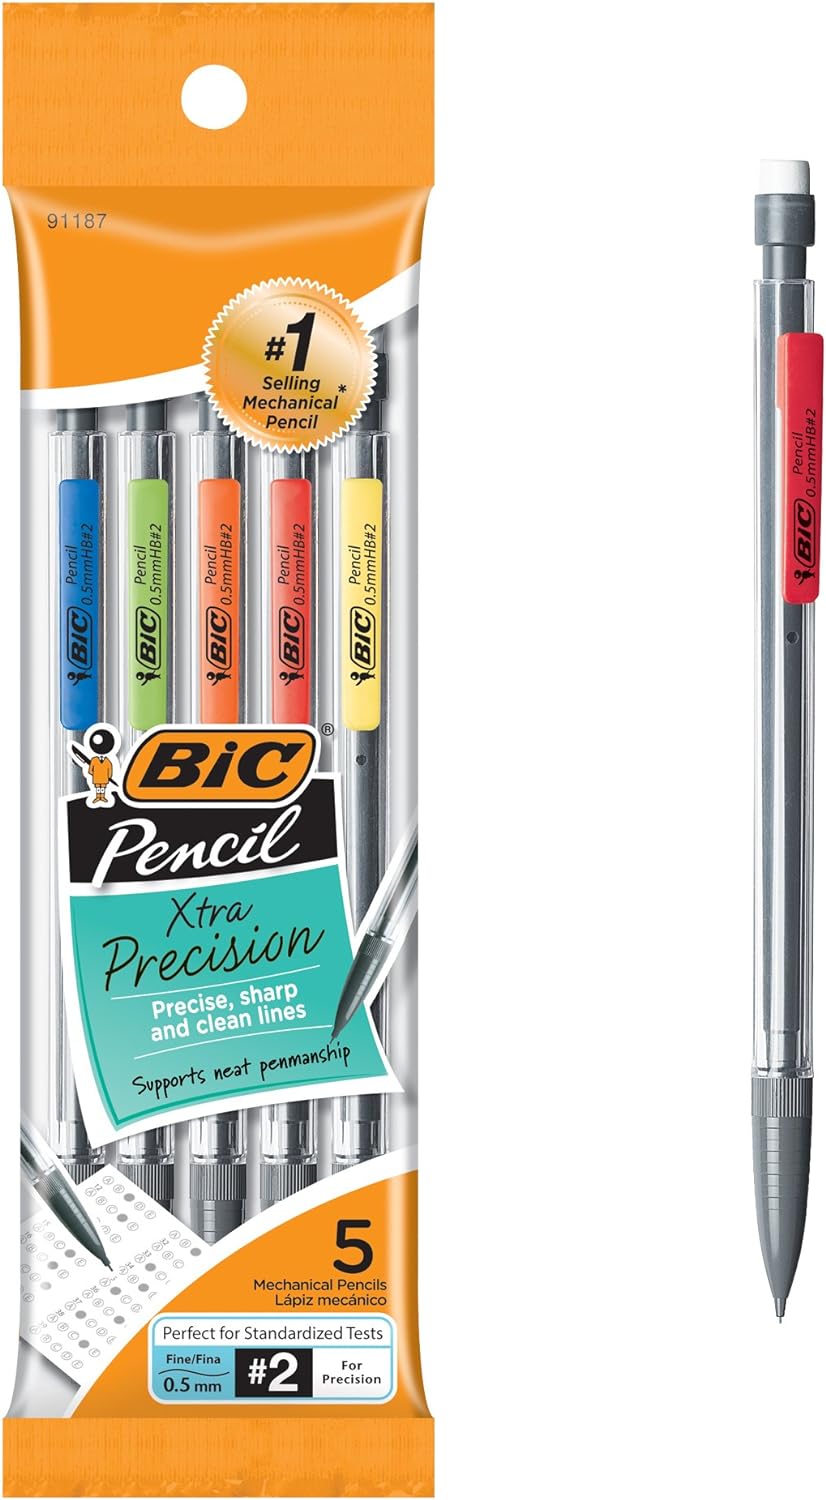 I have been using these BIC 0.5 mm mechanical pencils for years. I like ultra fine tips and these have never failed me! The erasers last two years with normal, a couple times a day kind of erasing.Now that I am teaching a pre-teen girl' Art Journaling class, I am ordering more for my students. Parents tend to scoff at them on my supply list and not invest in them, figuring any old pencil will do for doodling. This is somewhat true but everyone who uses these fine point mechanical pencils loves 